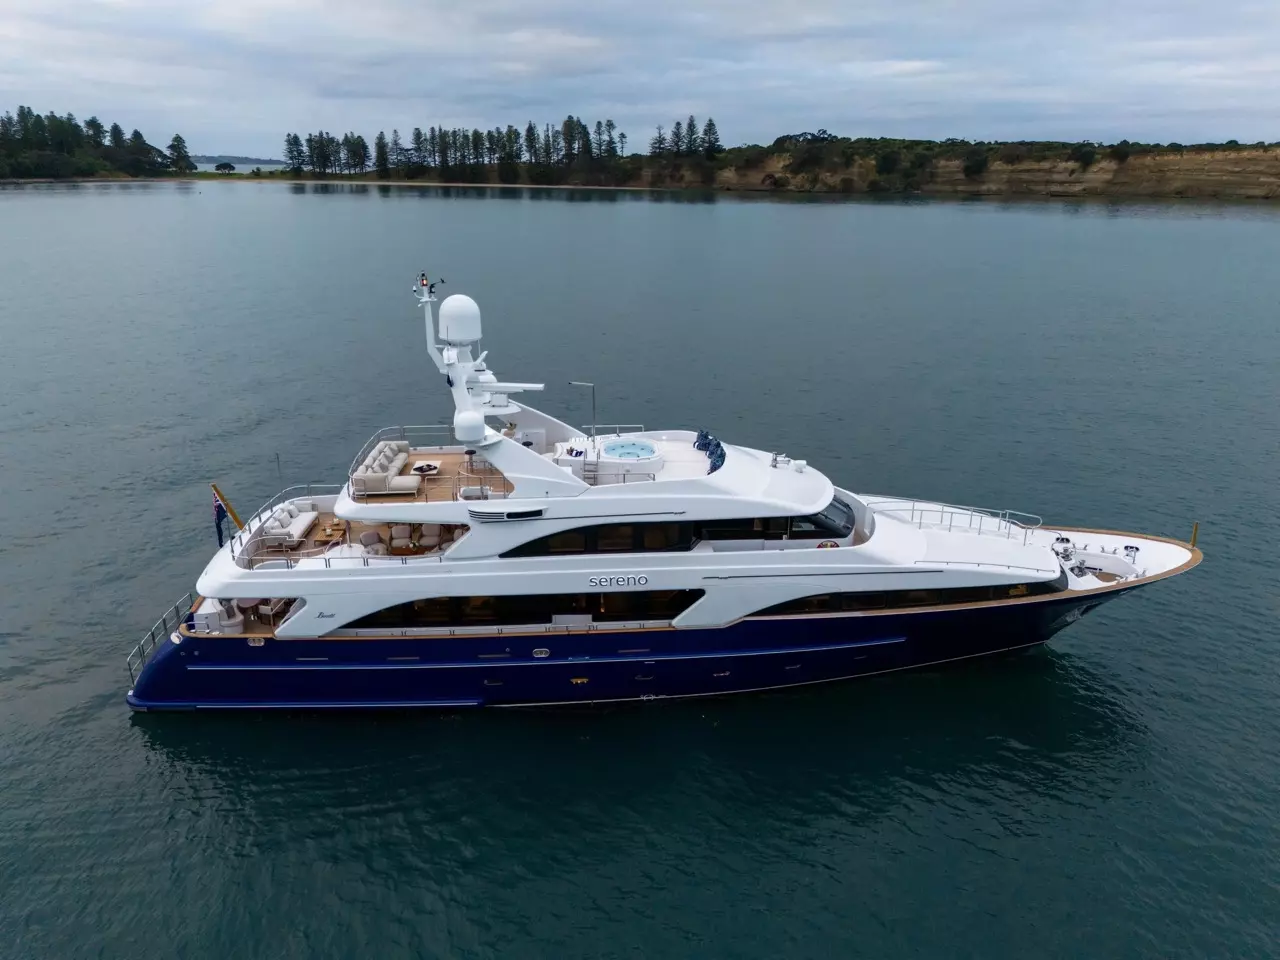 Sereno by Benetti - Top rates for a Charter of a private Superyacht in French Polynesia